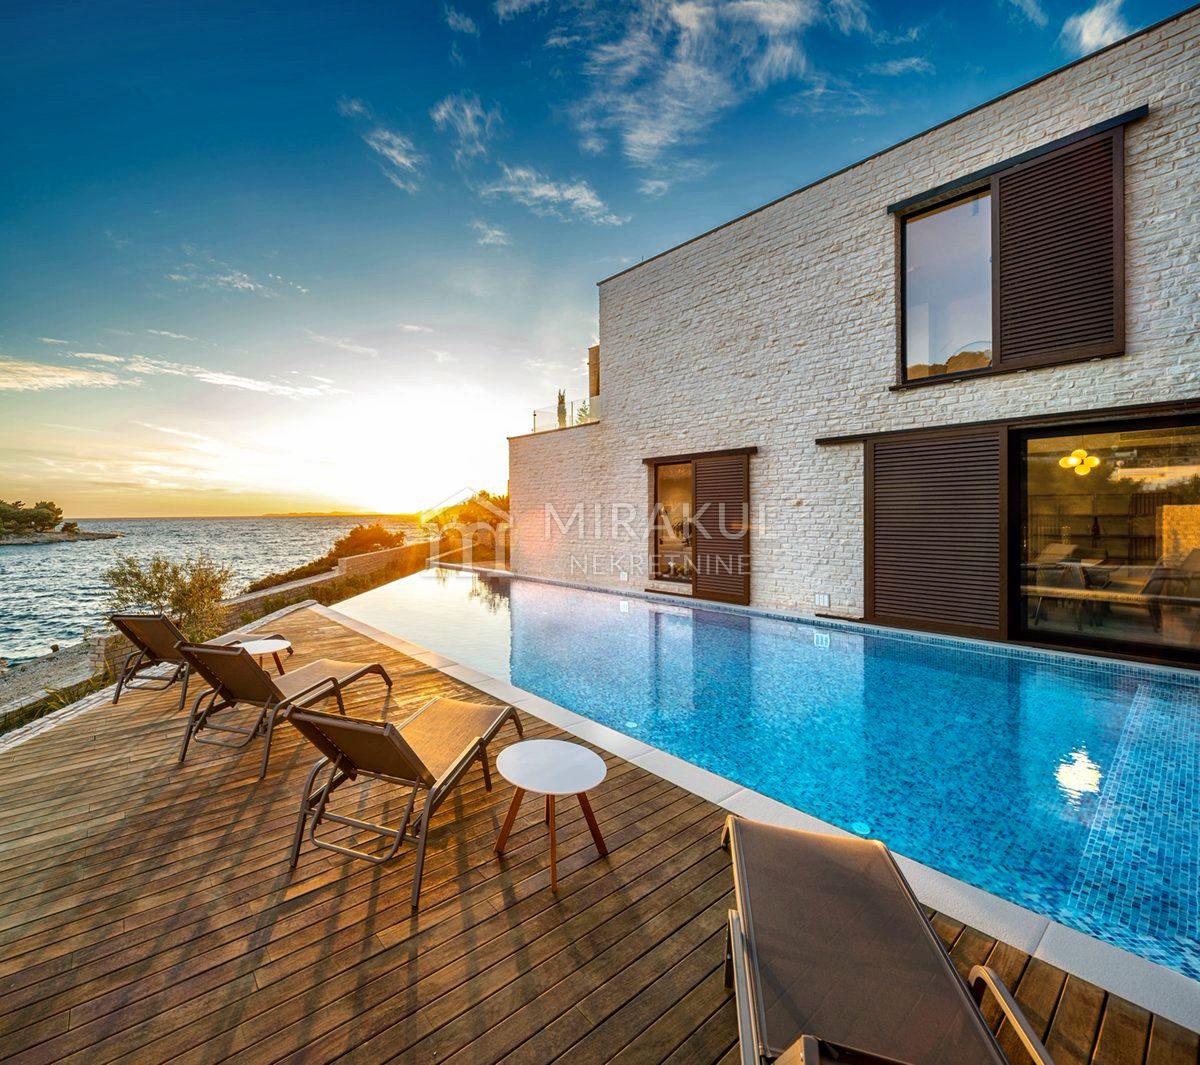 Real Estate Primošten, Exclusive Villa No. 3 with a pool and a beautiful view of the sea